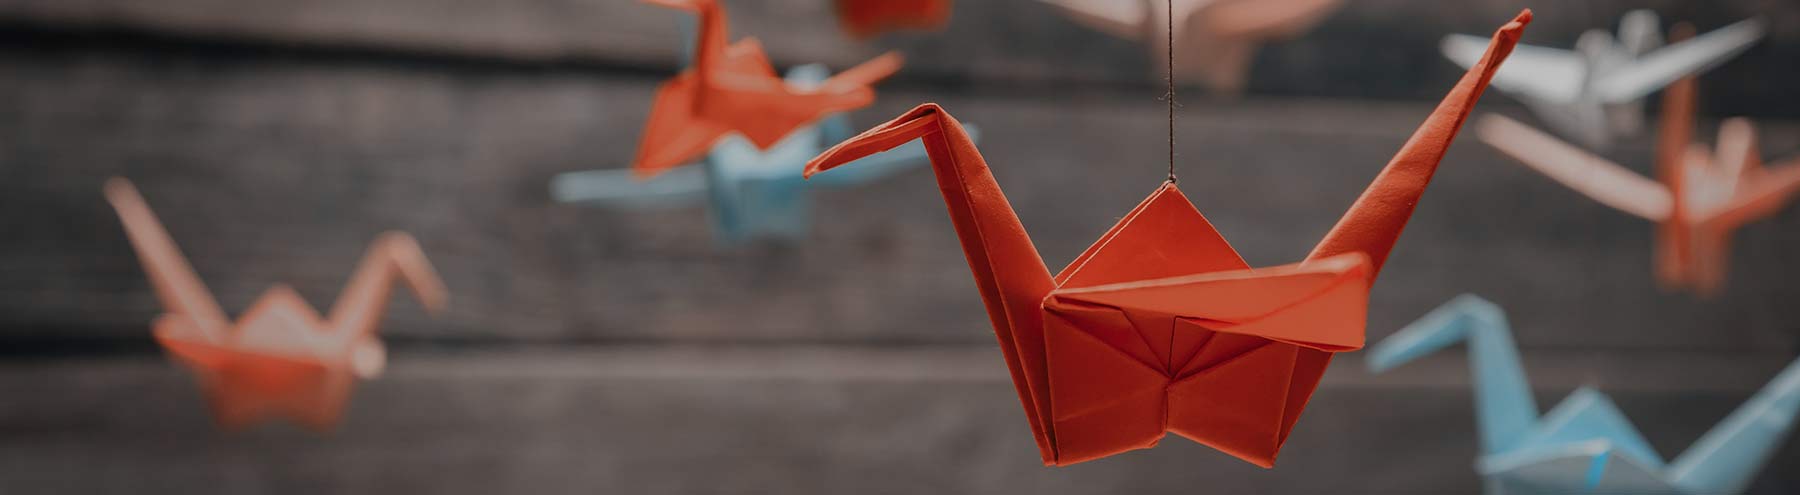 What's the connection between a cow, a digital printer and origami?